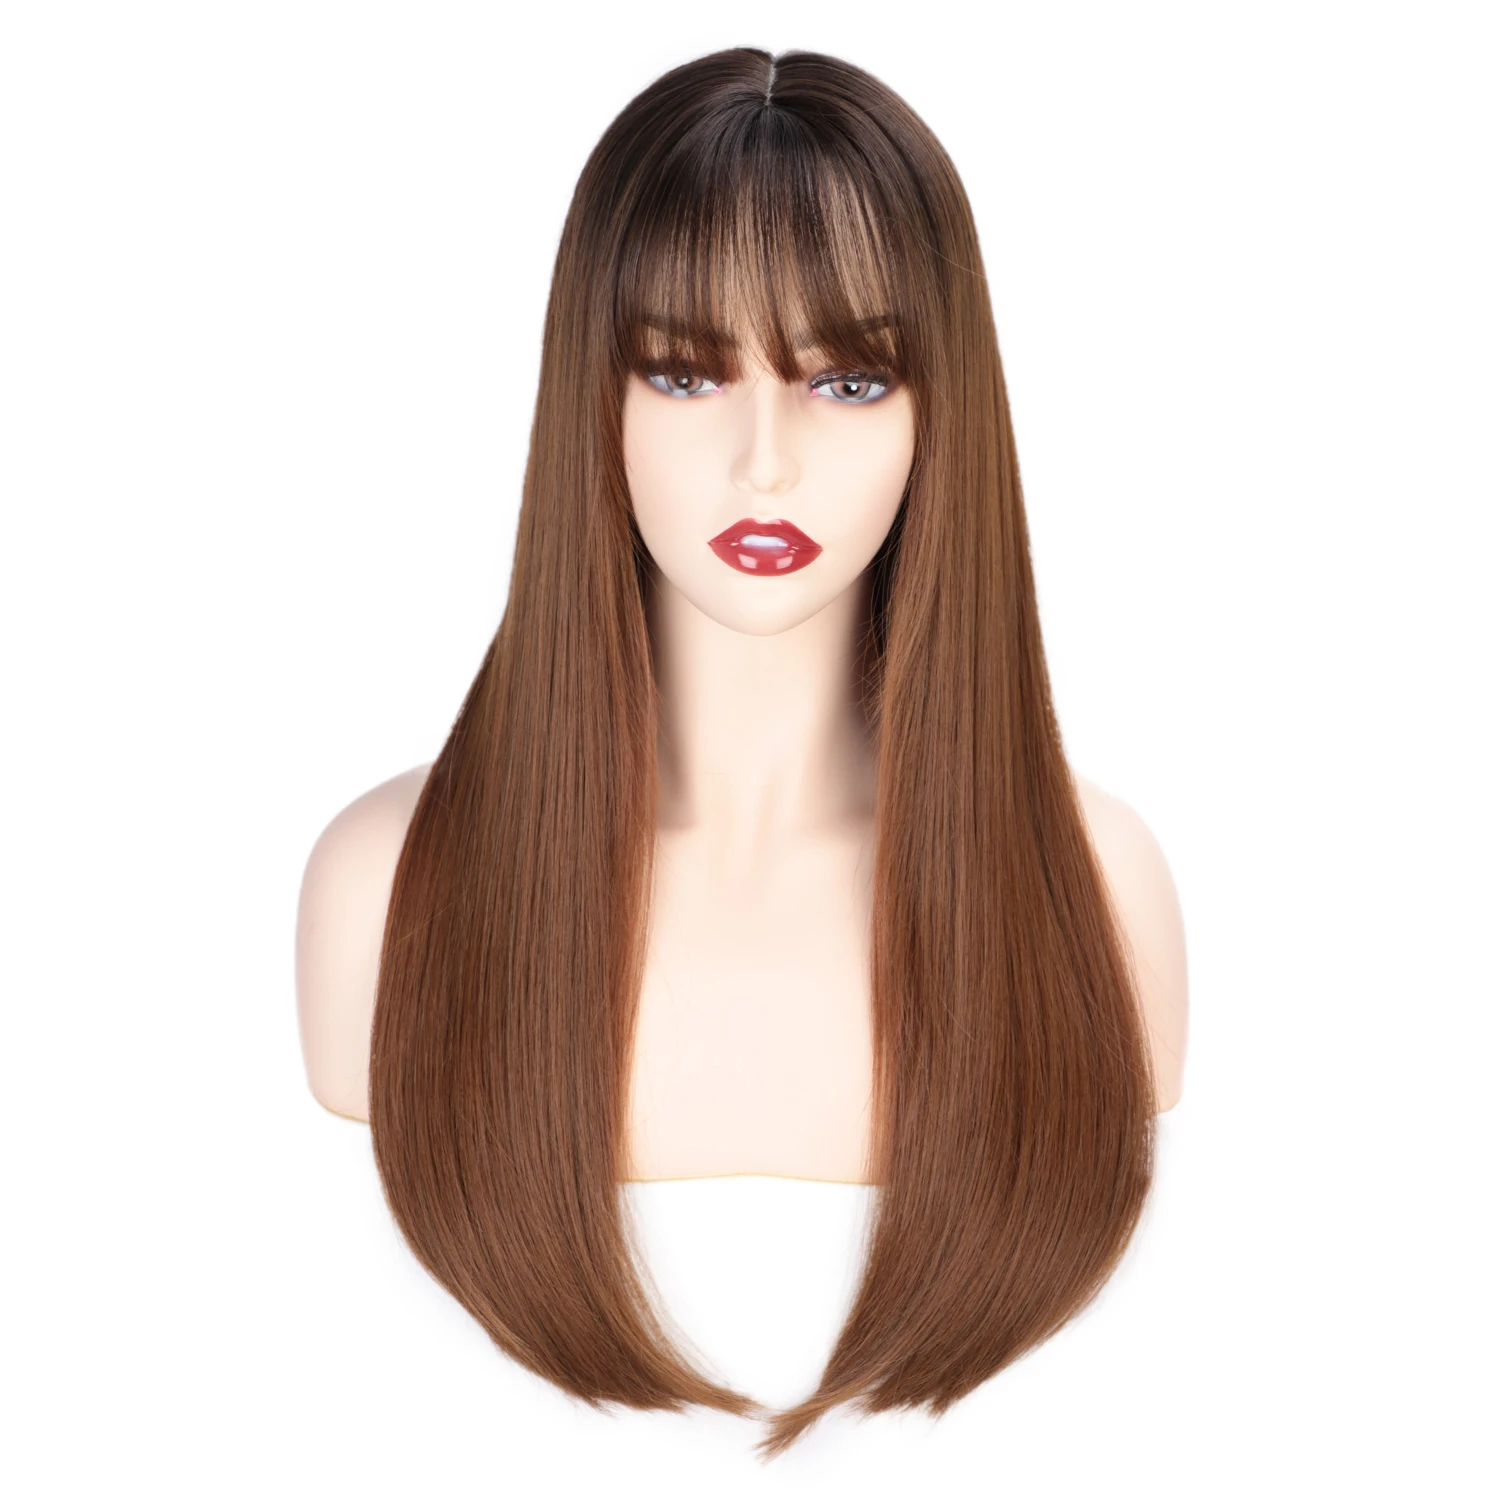 

Aisi Hair Popular Vendor Cheap Wholesale Straight Natural Wave Ombre Brown Wig With Bangs For Black Women Synthetic Hair Wigs